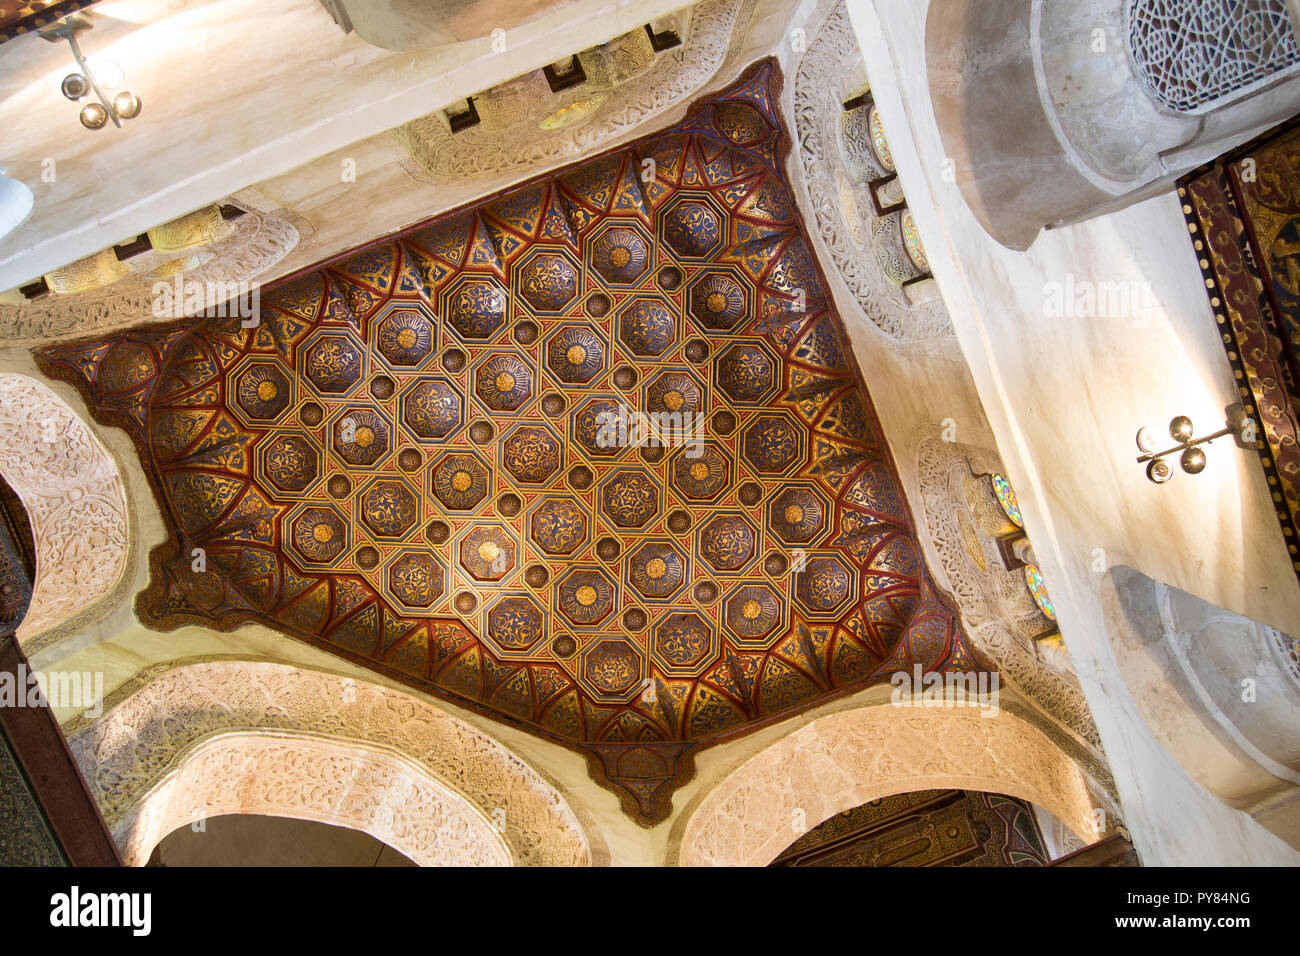 A ceiling in Qalawun Complex (Mosque, and others) in Al-Moez Street, Cairo, Egypt. engraving units. Beautiful historical architecture since 1285 A.D. Stock Photo